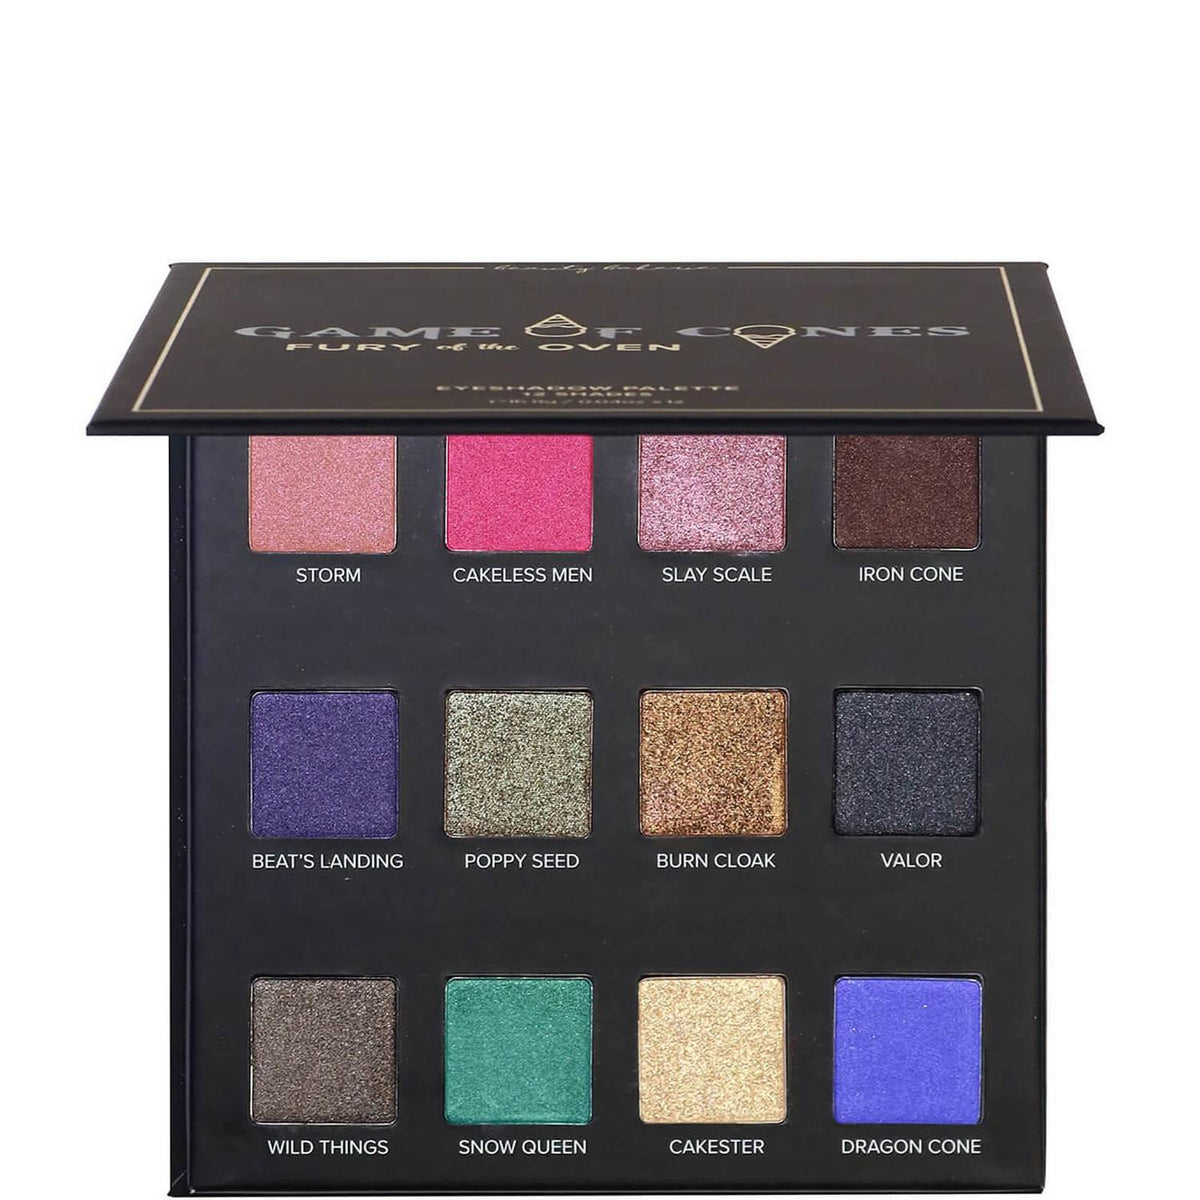 Beauty Bakerie Game Of Cones Fury Of The Oven Eyeshadow Palette